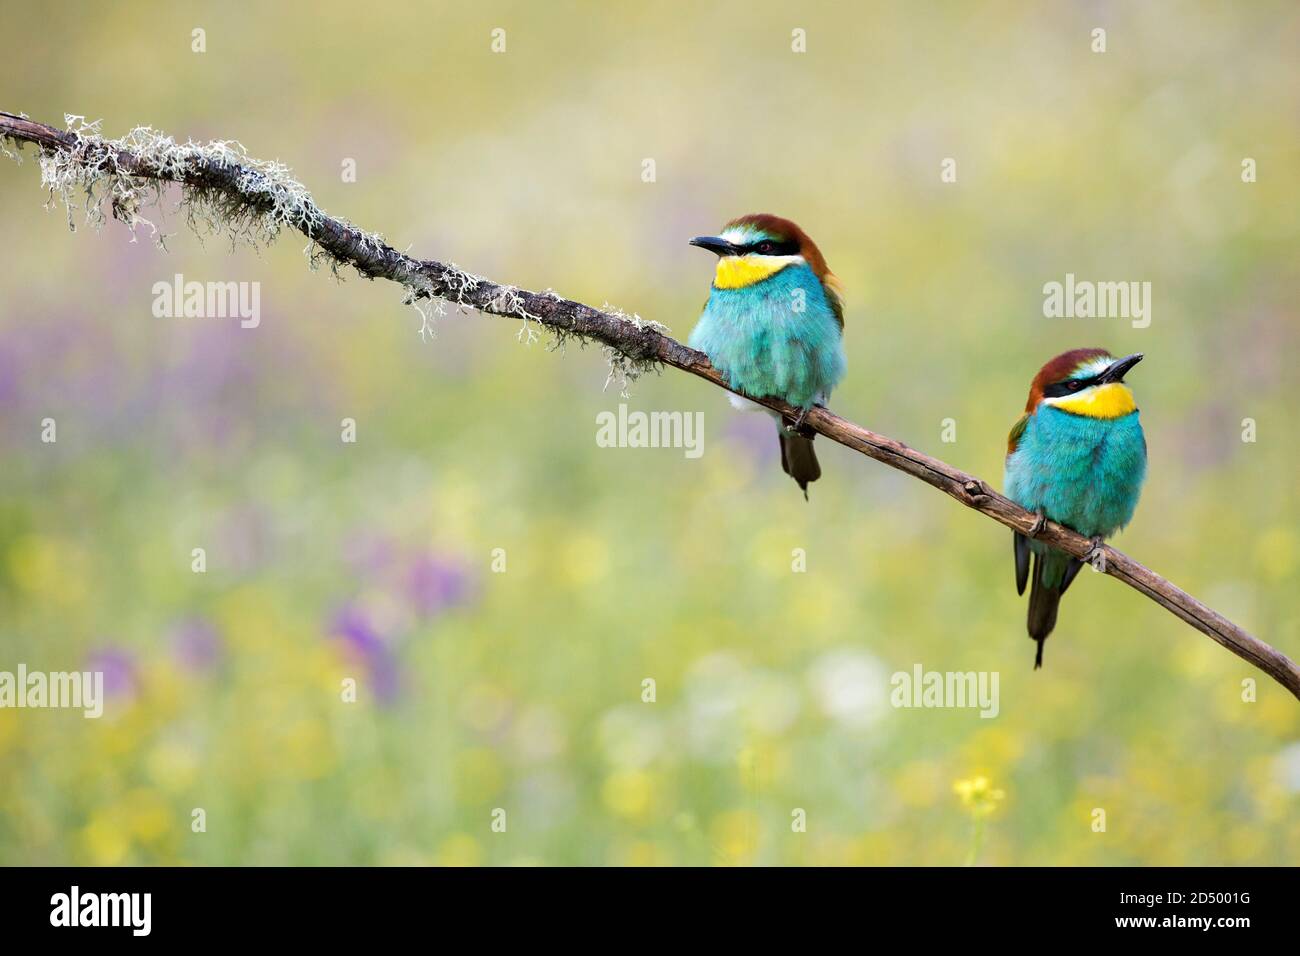 European bee eater (Merops apiaster), on a branch, Spain Stock Photo